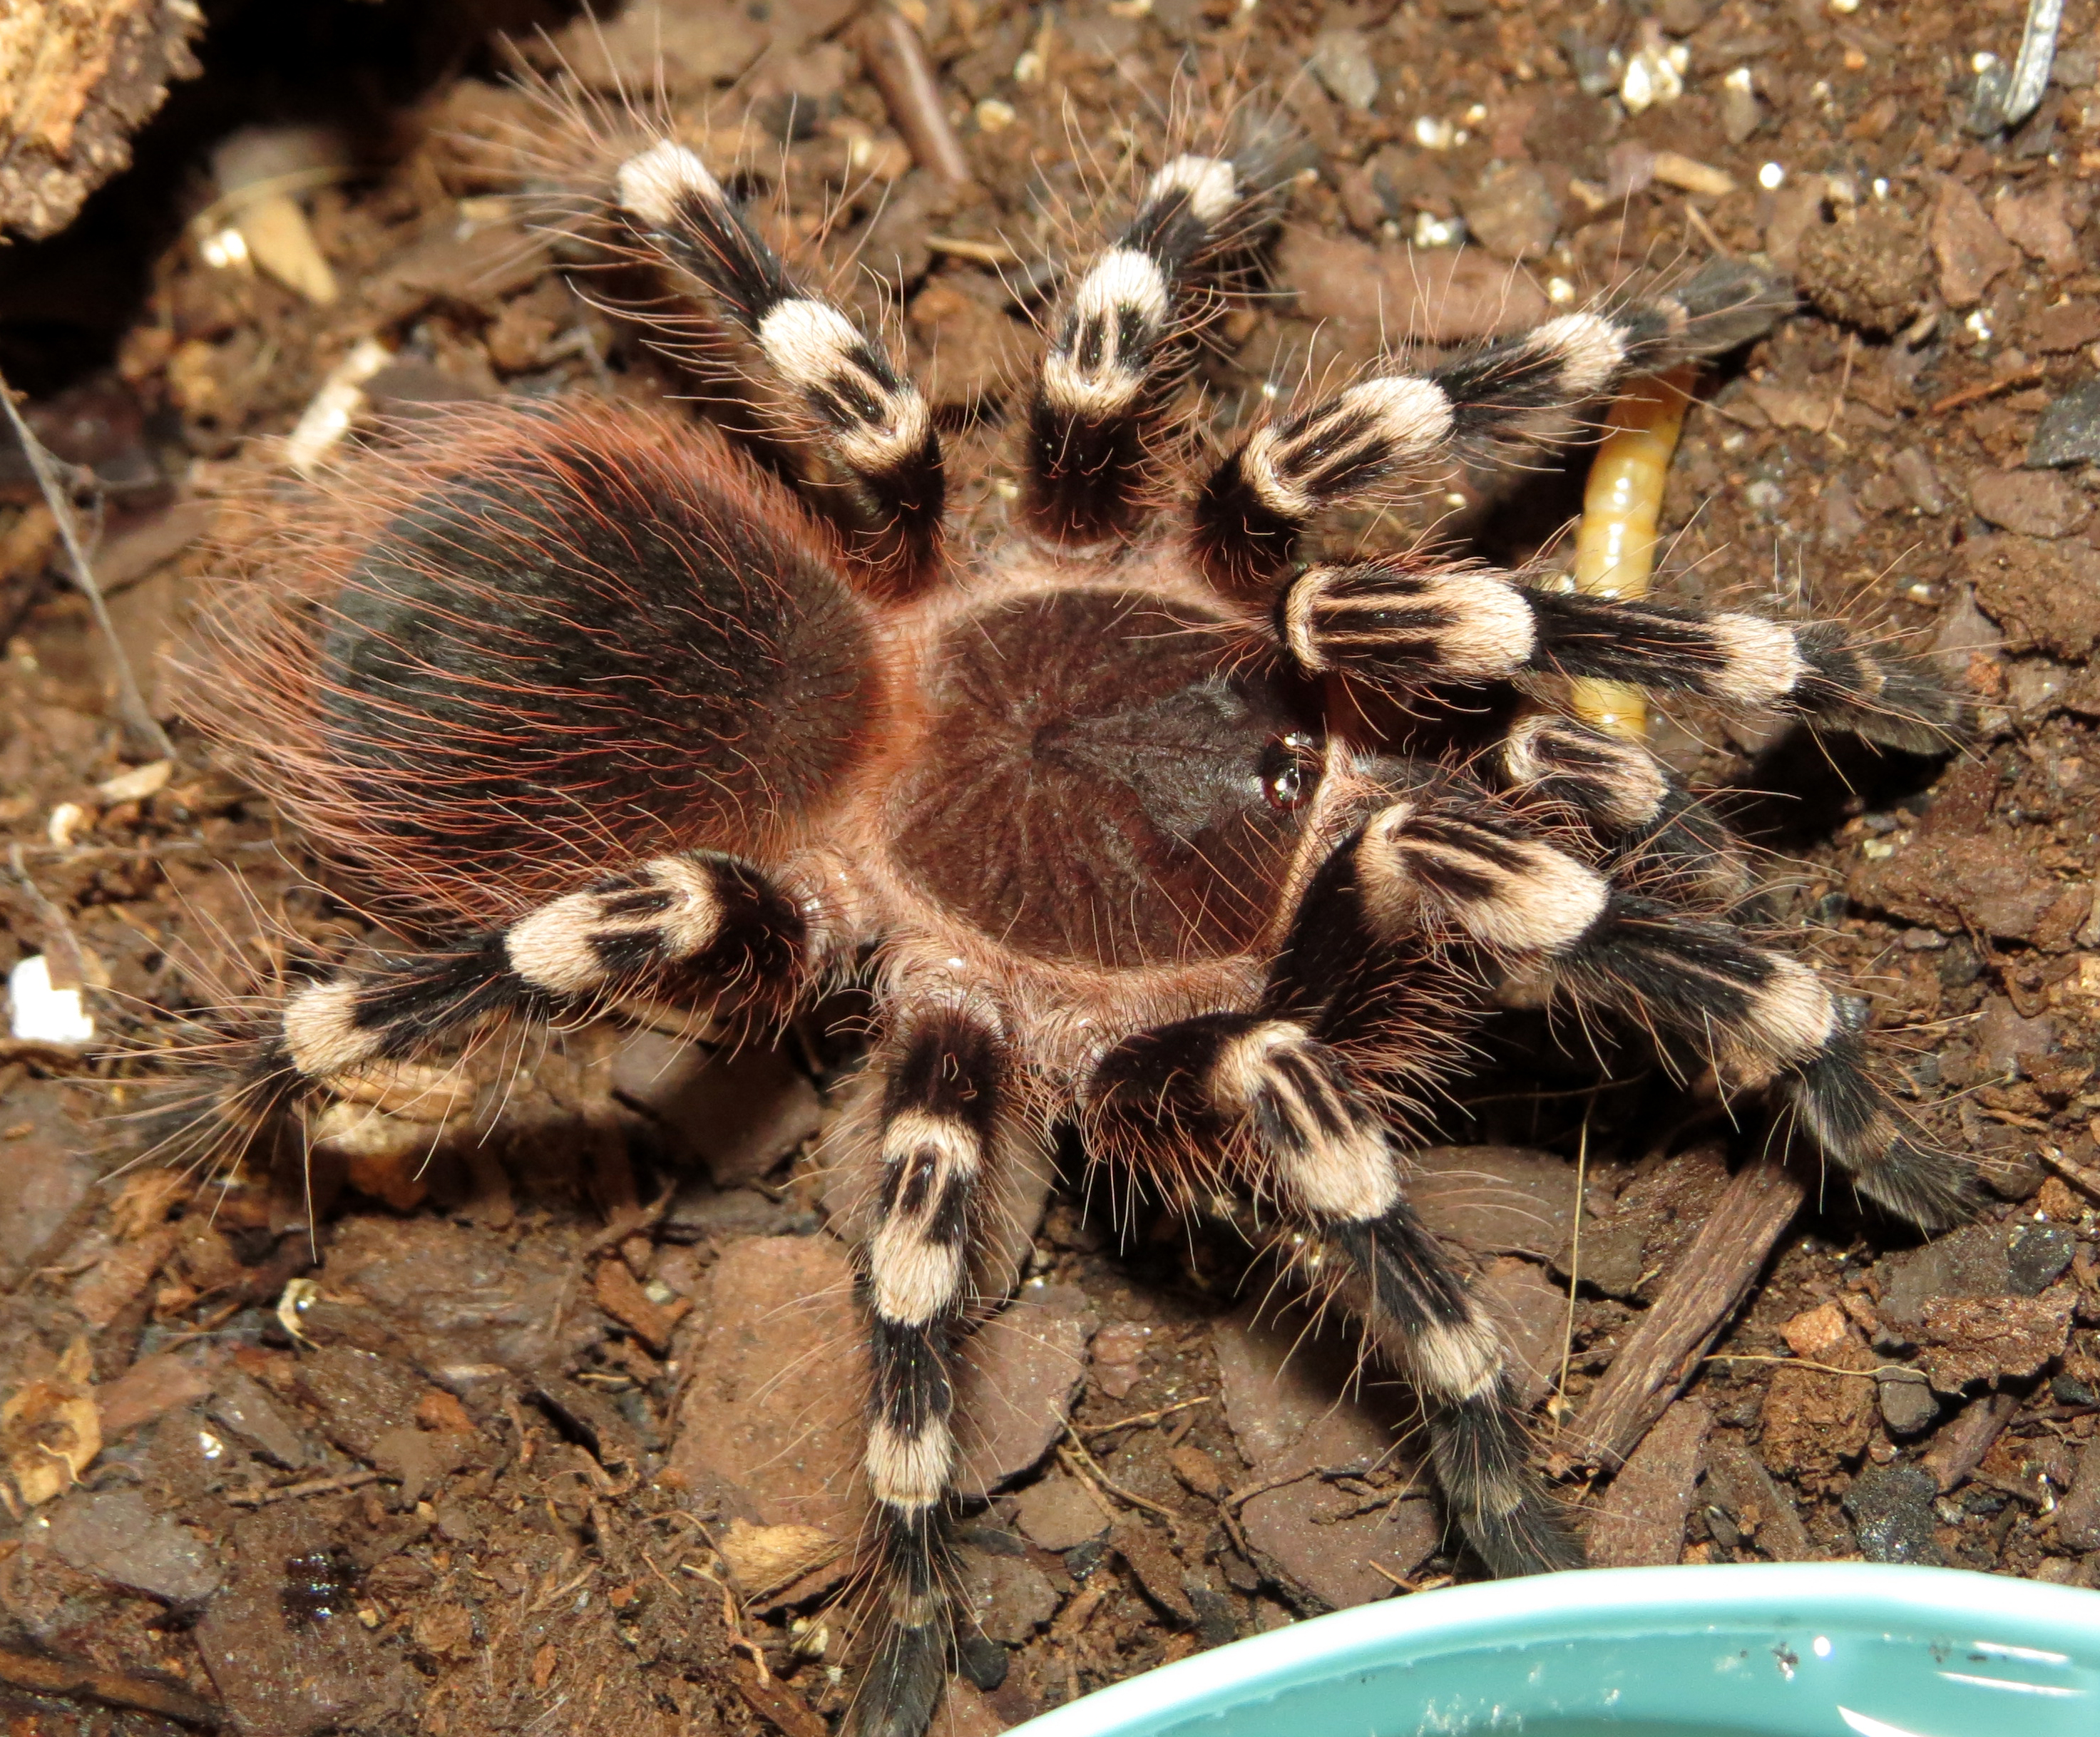 Getting Too Big for Worms (♂ Acanthoscurria geniculata 3.5")